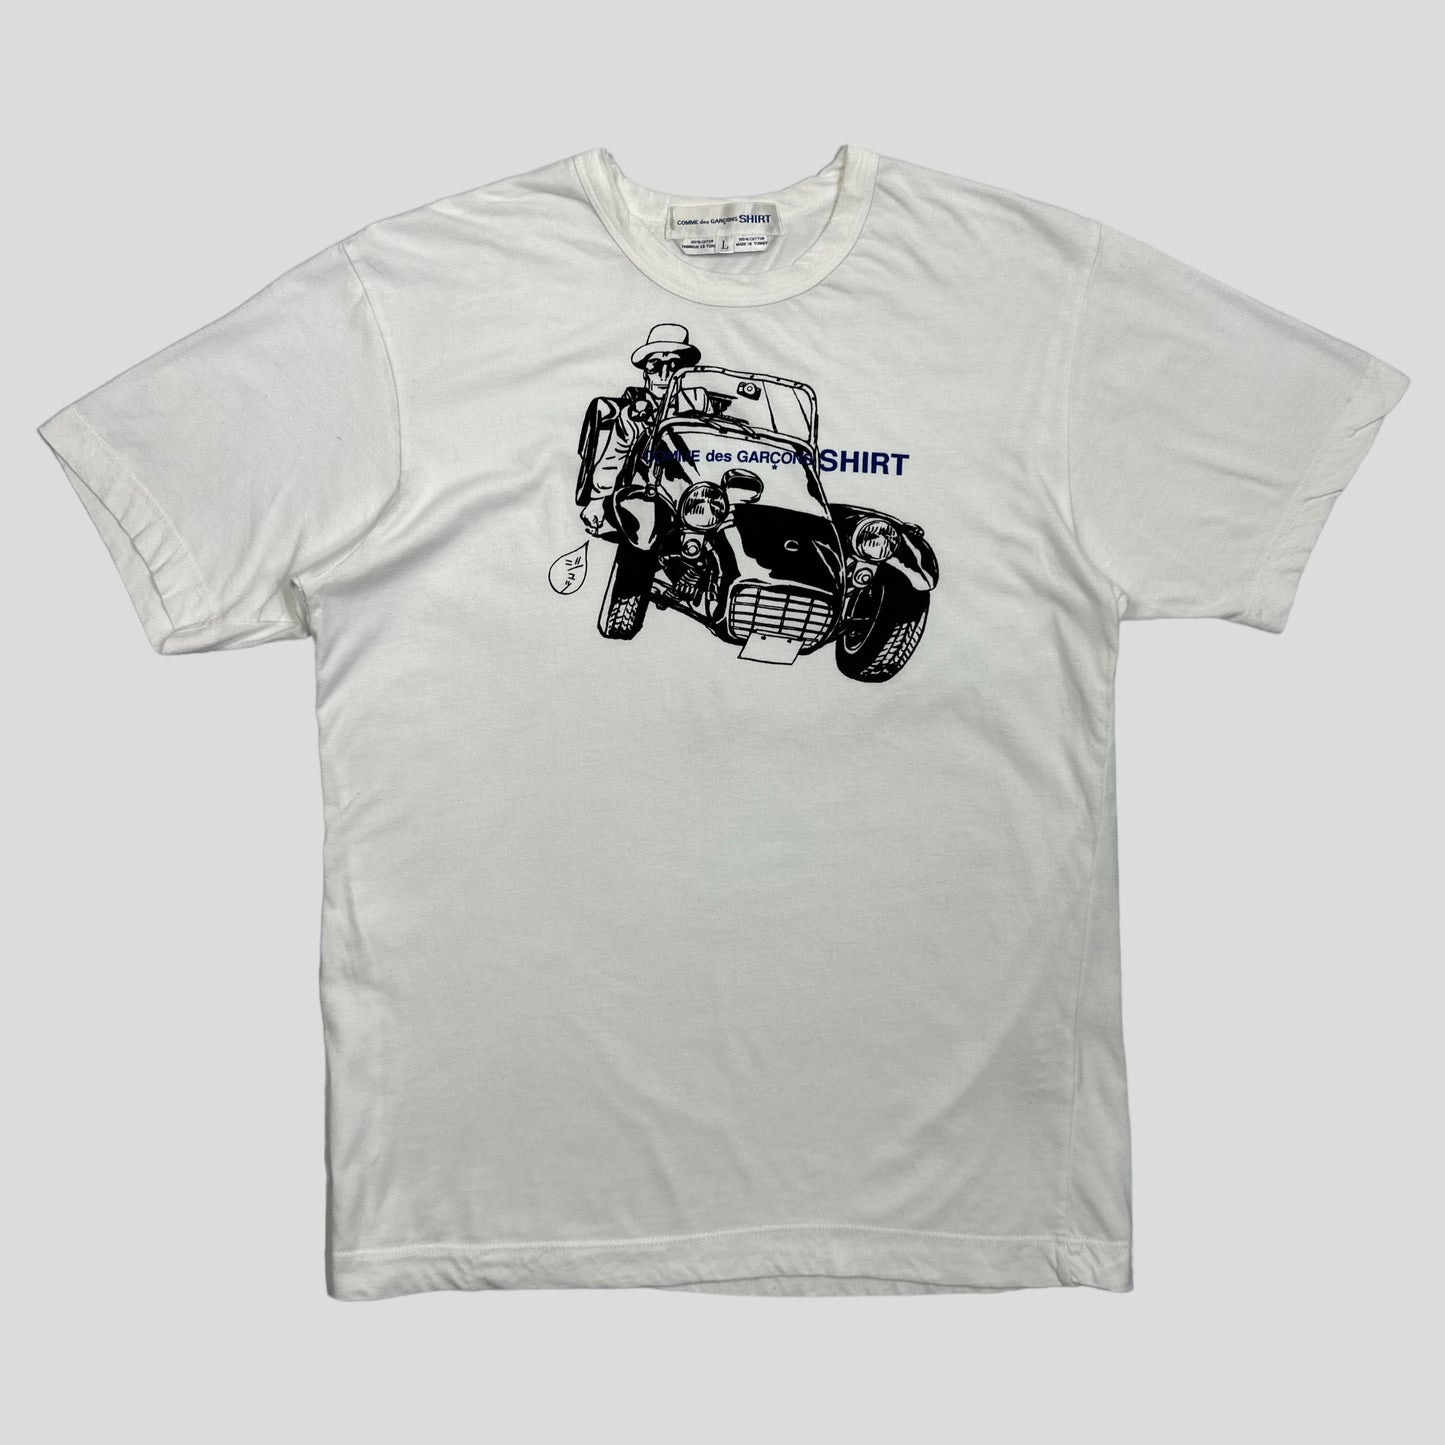 CDG Shirt Car Spellout Graphic T-shirt - L (M)